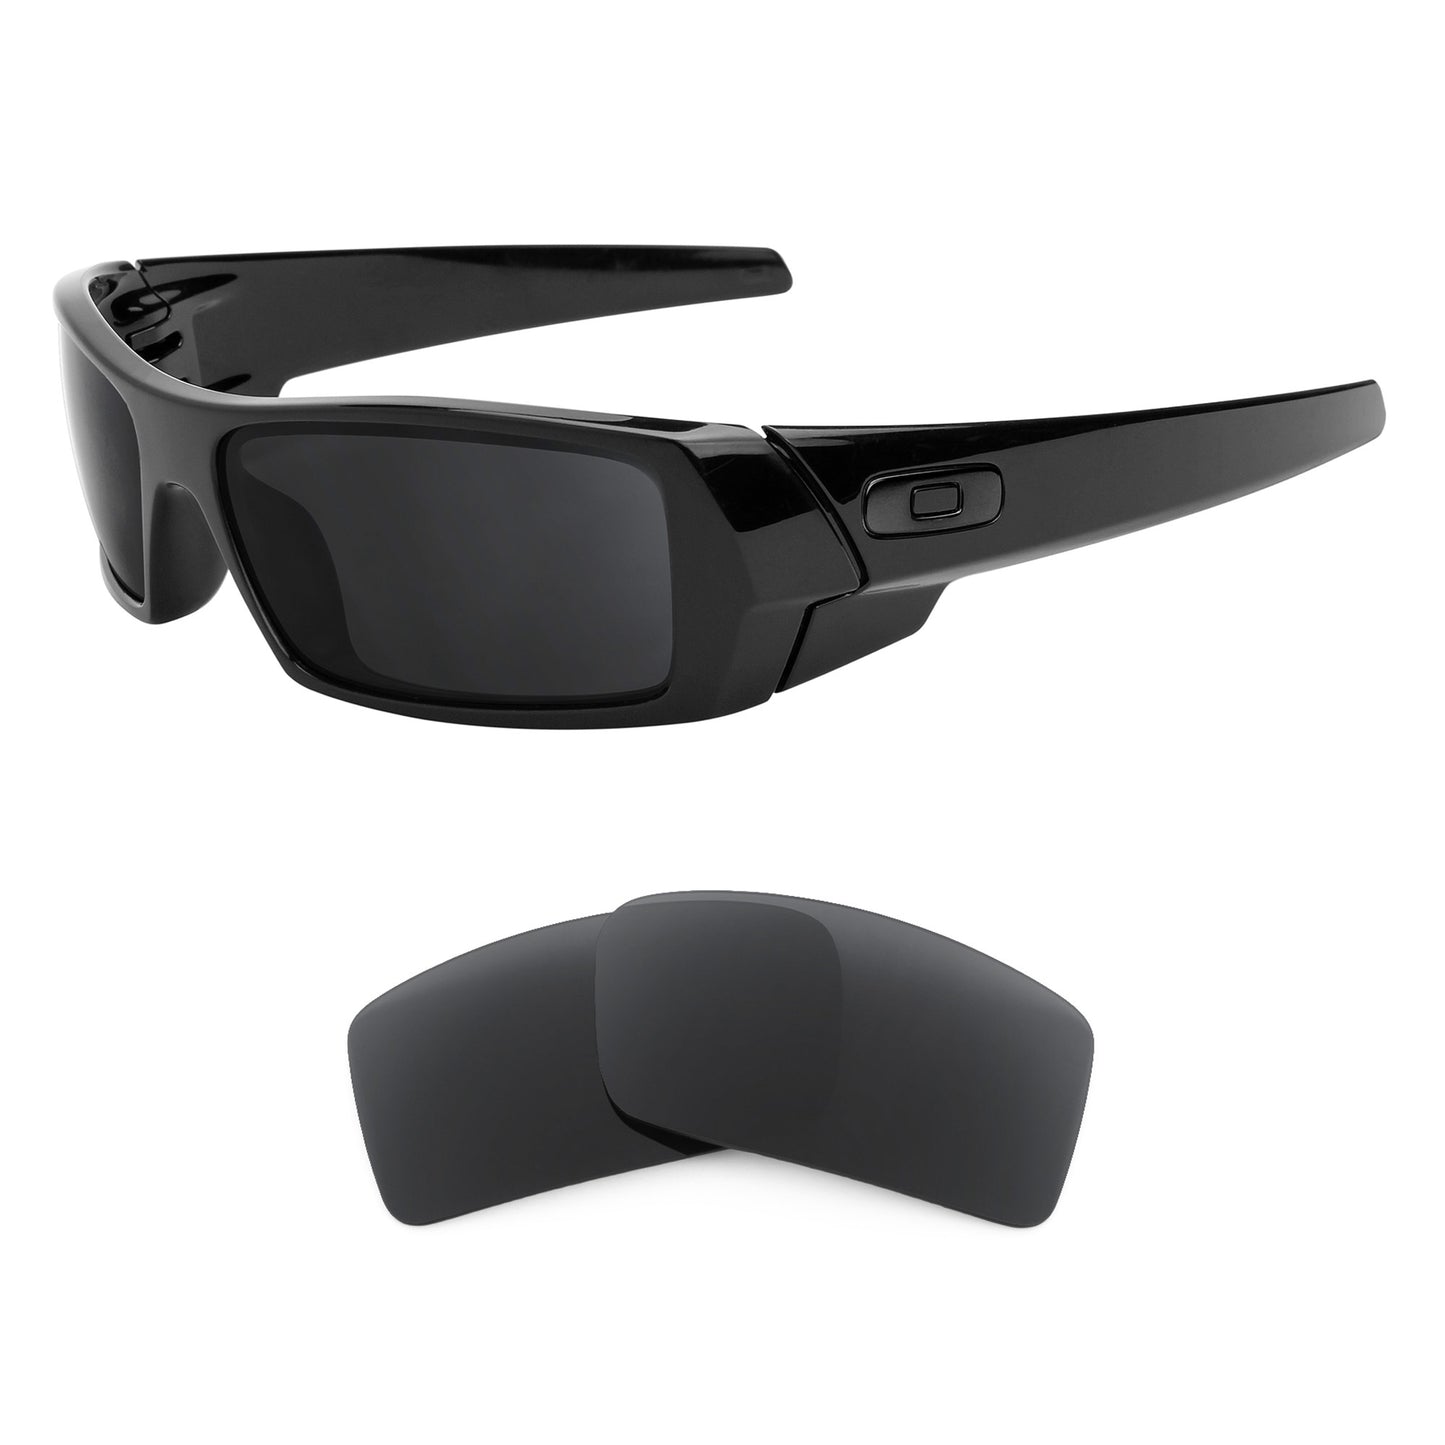 Oakley Gascan sunglasses with replacement lenses